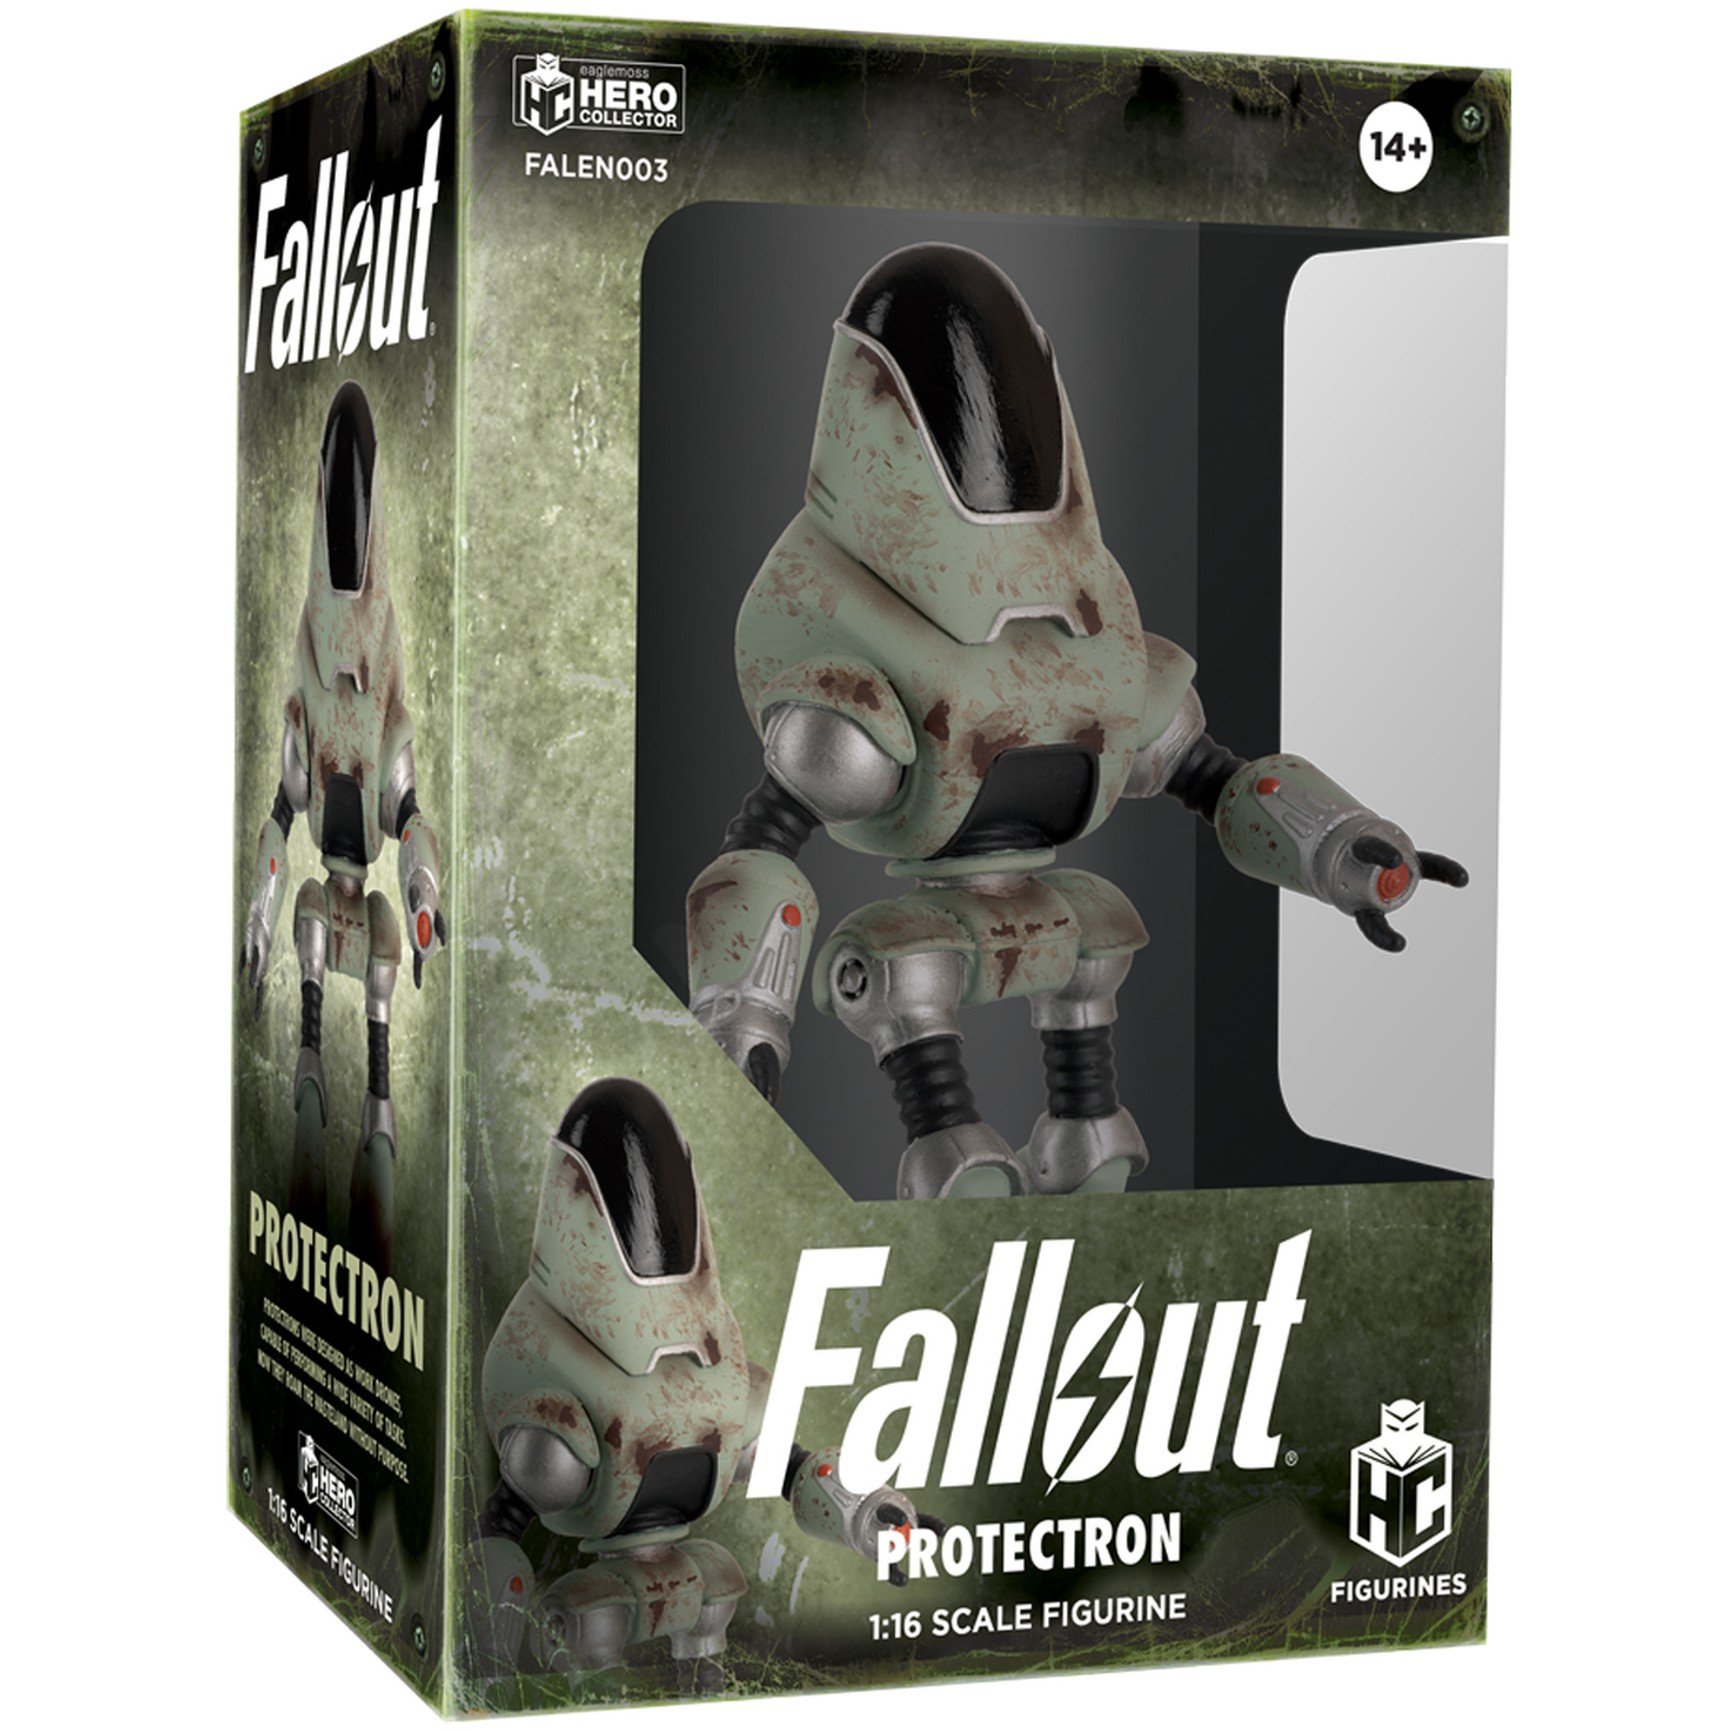 Fallout Collection Protectron 1:16 Scale Figurine画像